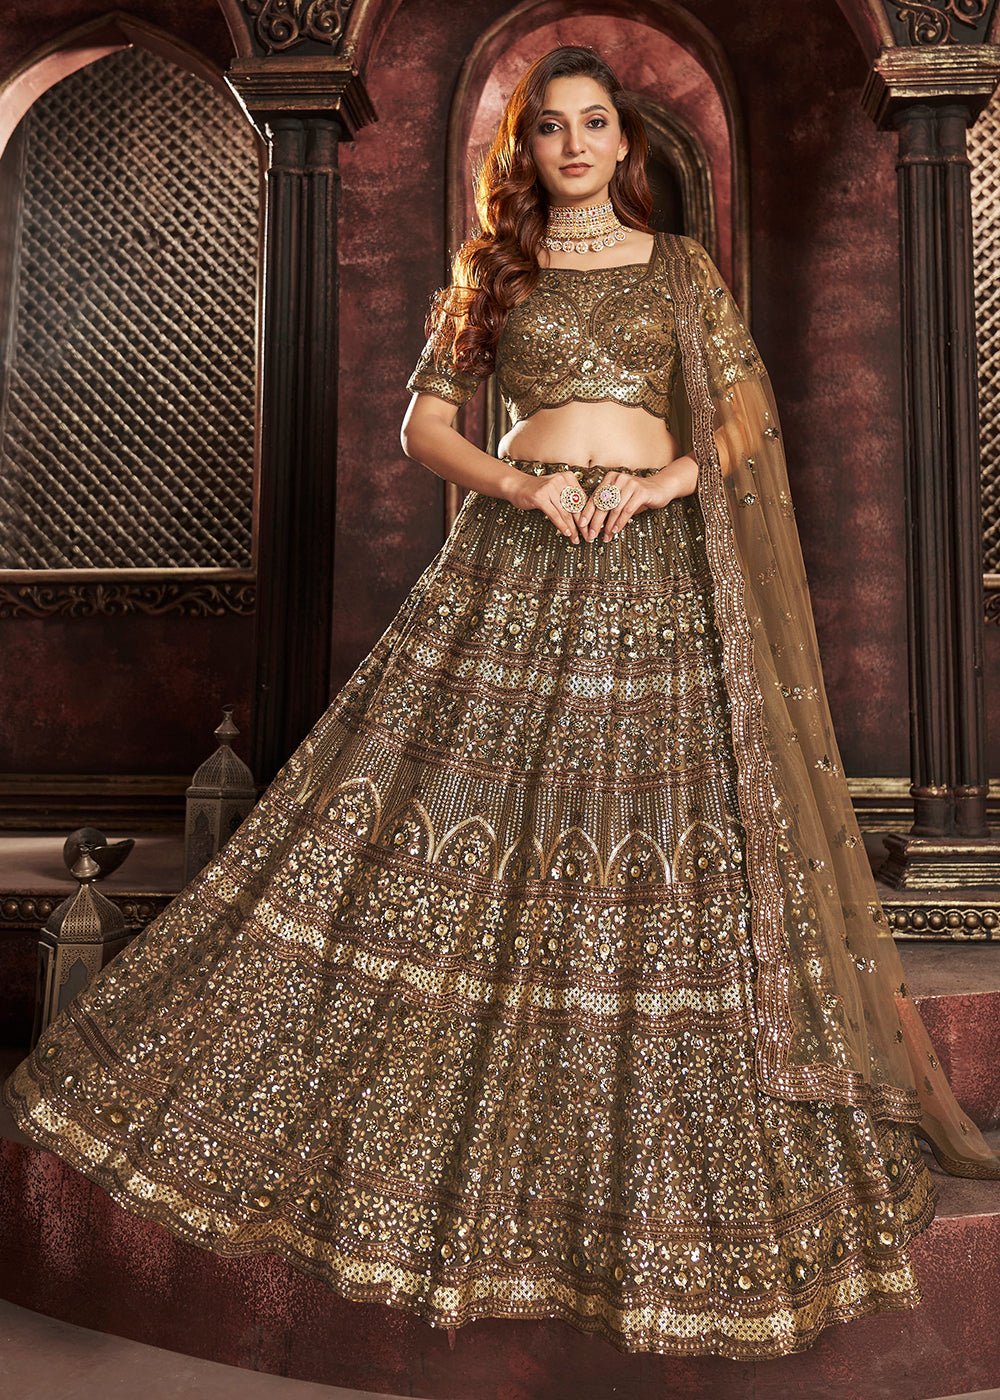 Buy Now Heavy Embroidered Chocolate Brown Net Bridal Lehenga Choli Online in USA, UK, Canada & Worldwide at Empress Clothing.